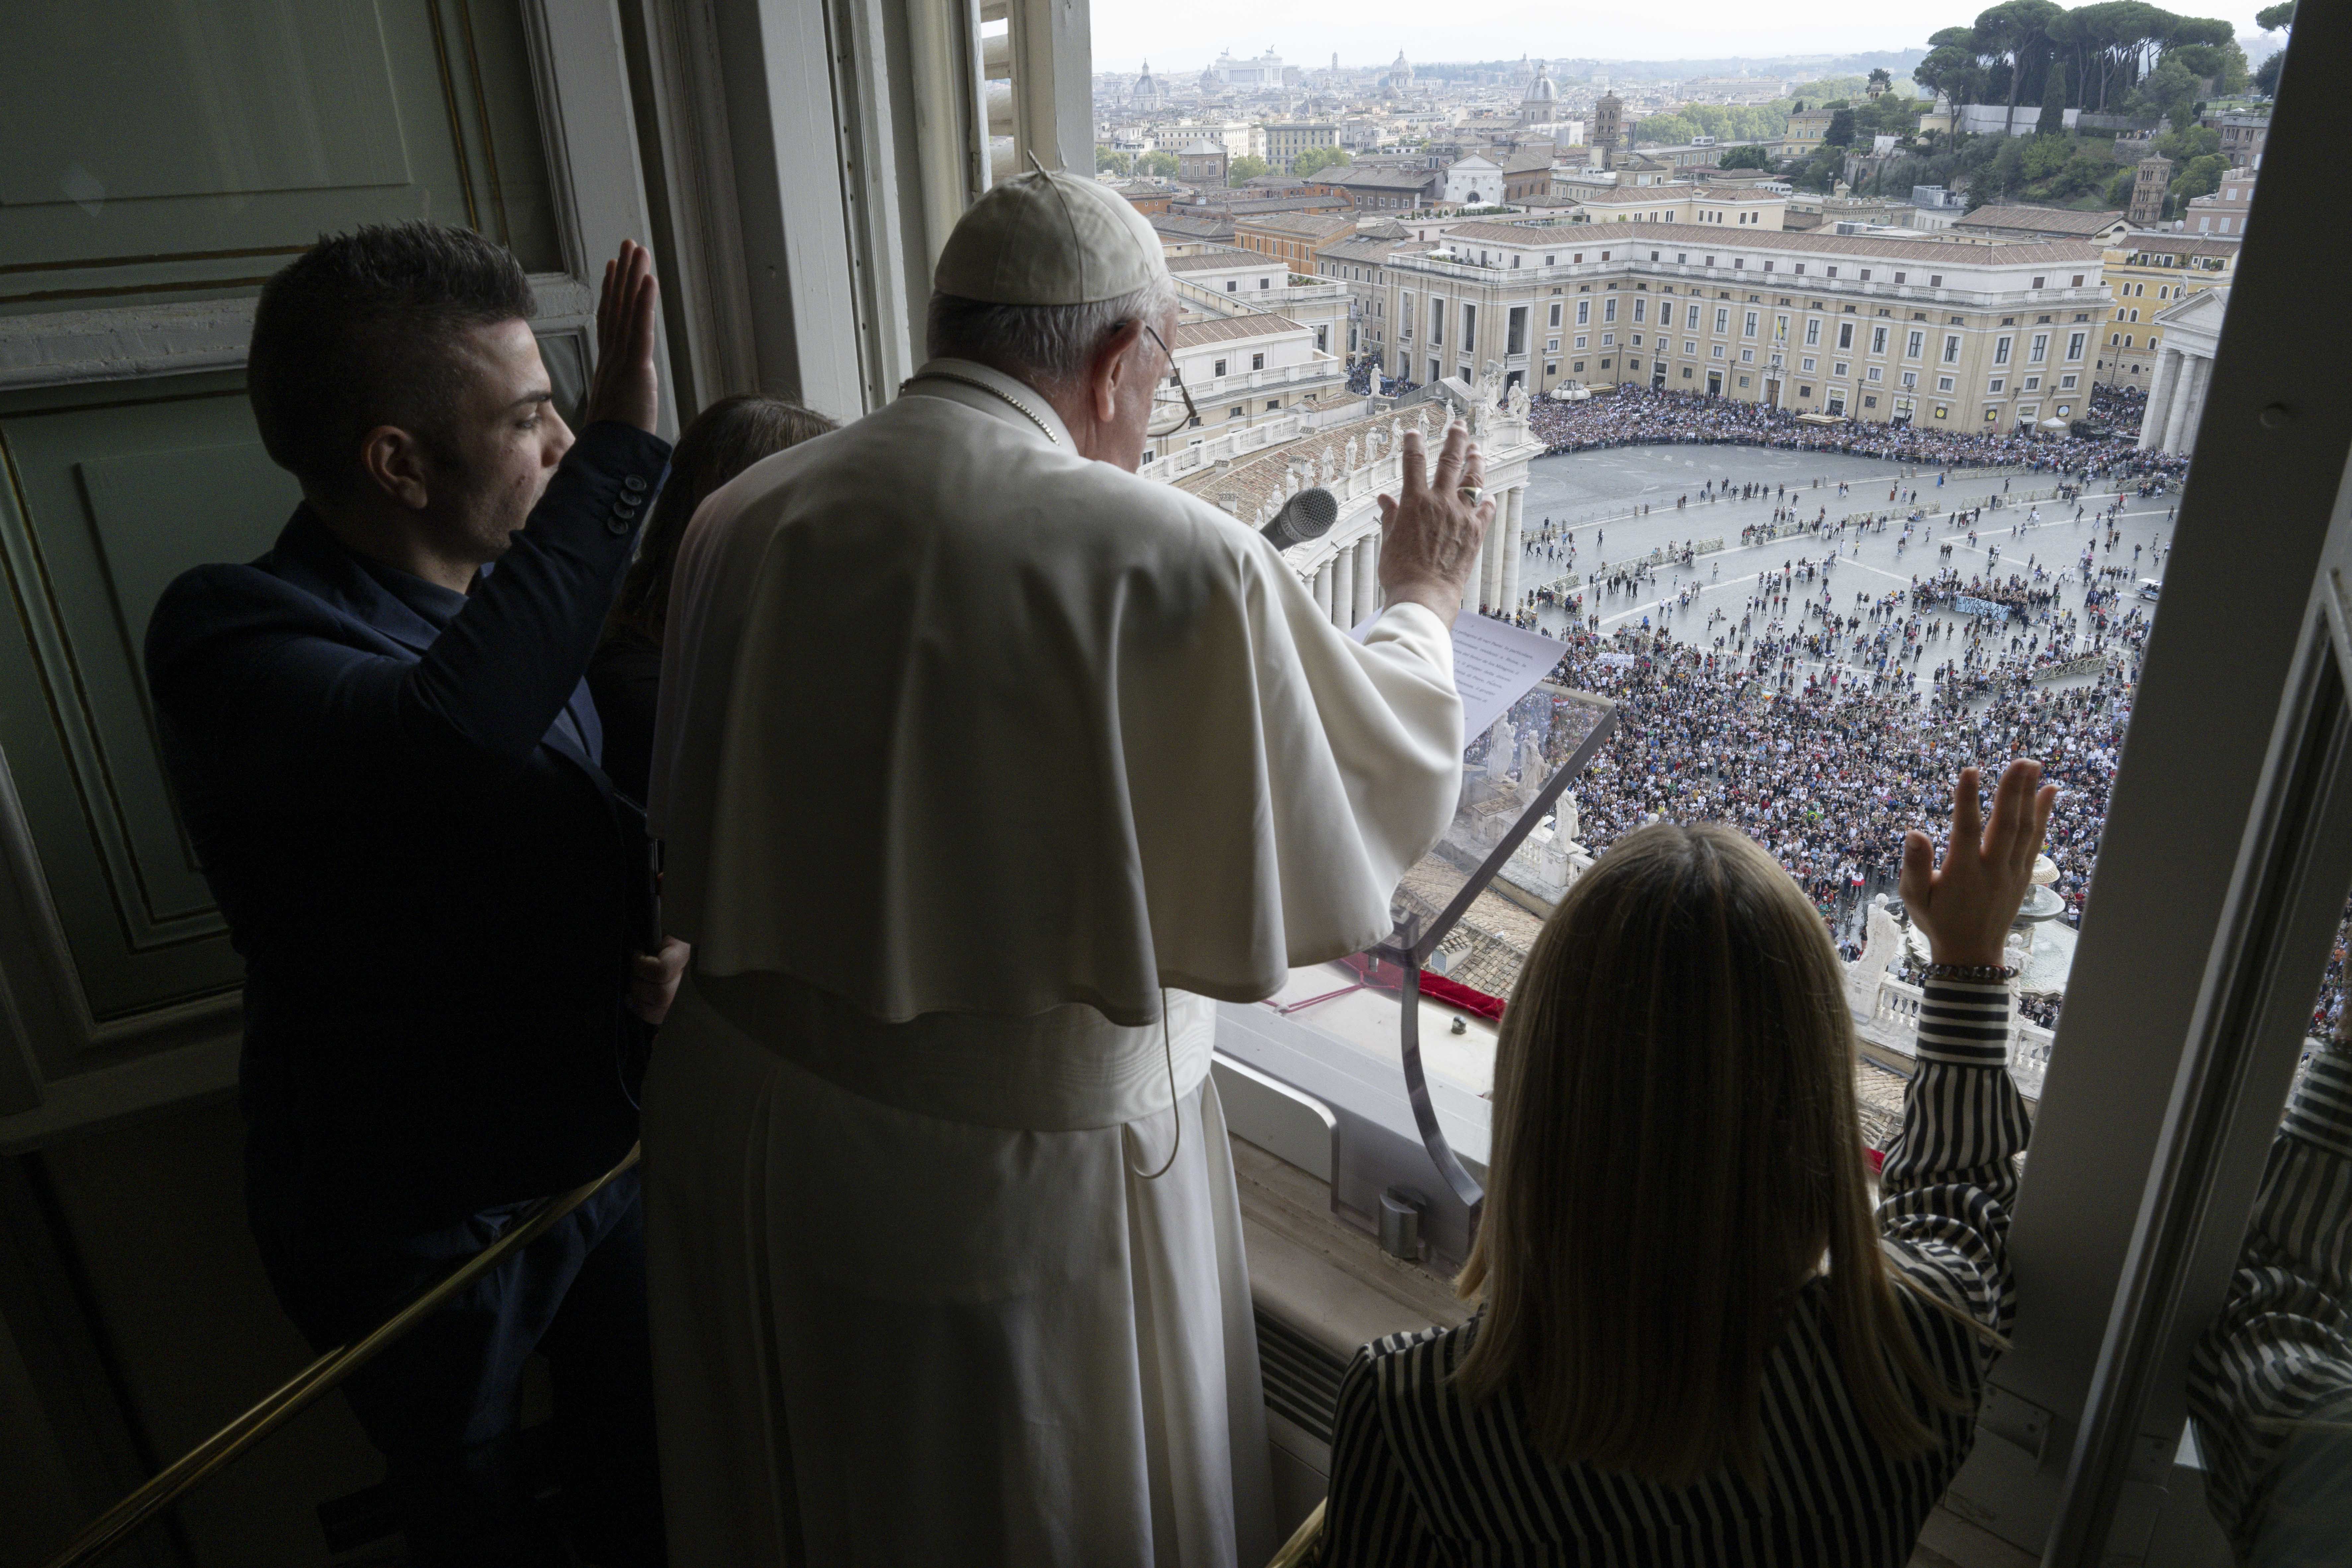 Pope Francis announces that World Youth Day registration is open